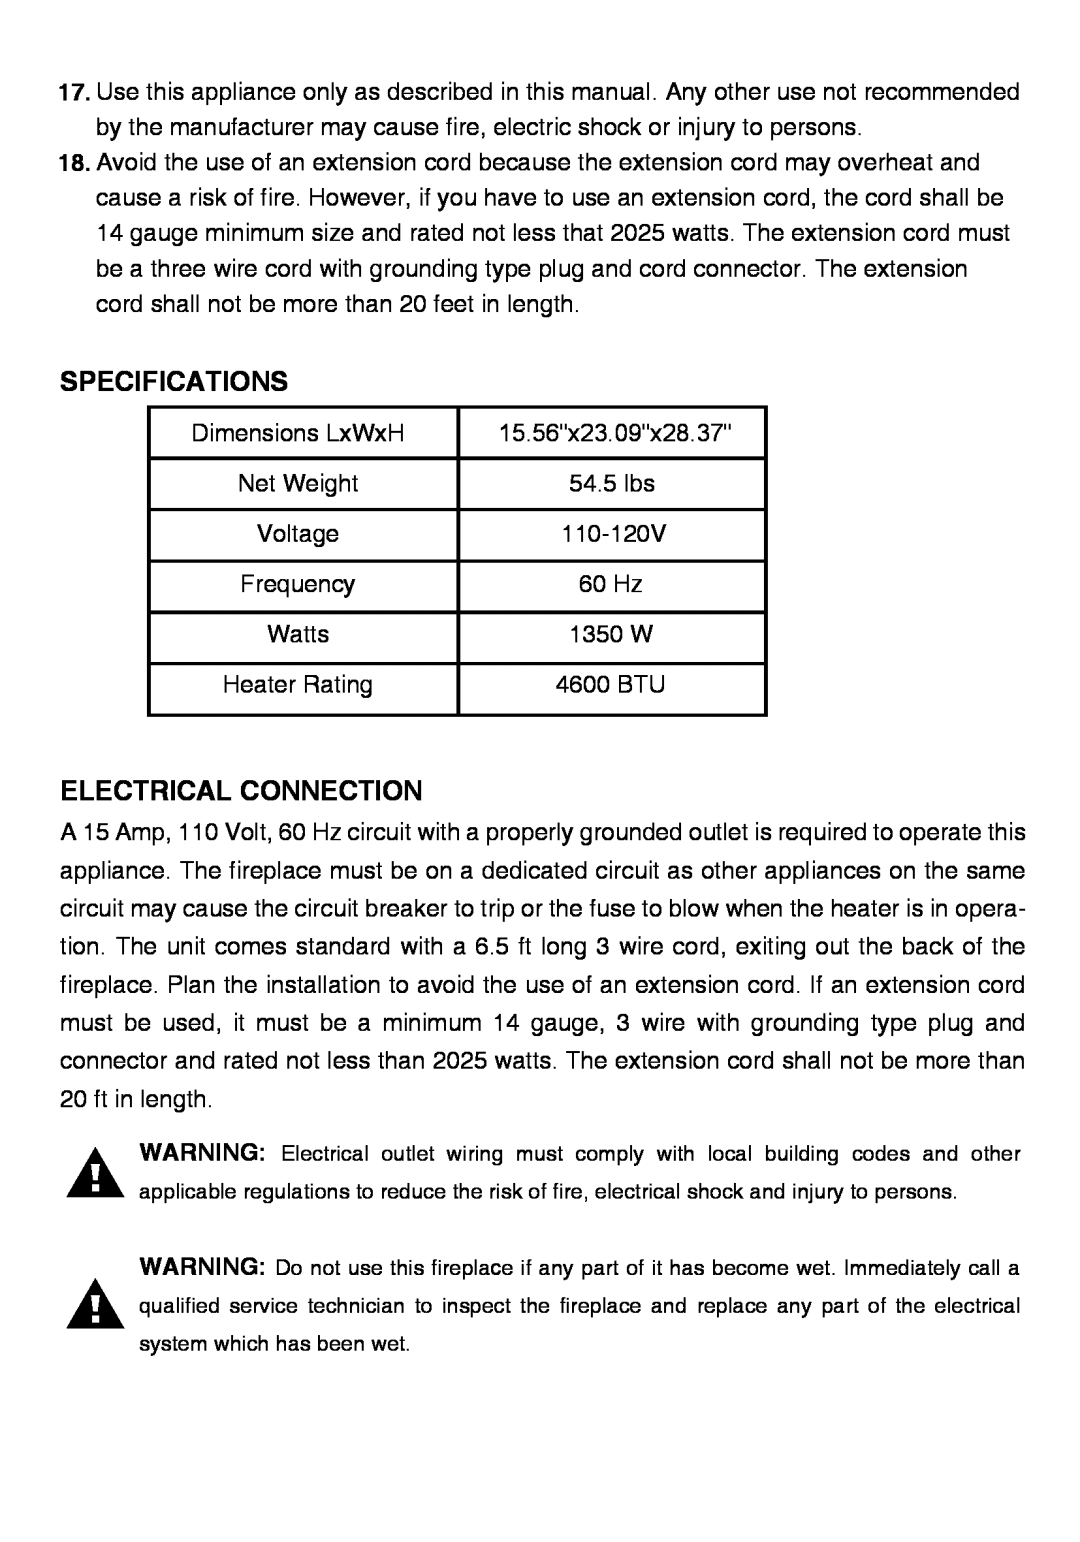 Well Traveled Living 60353, Stowe manual Specifications, Electrical Connection 